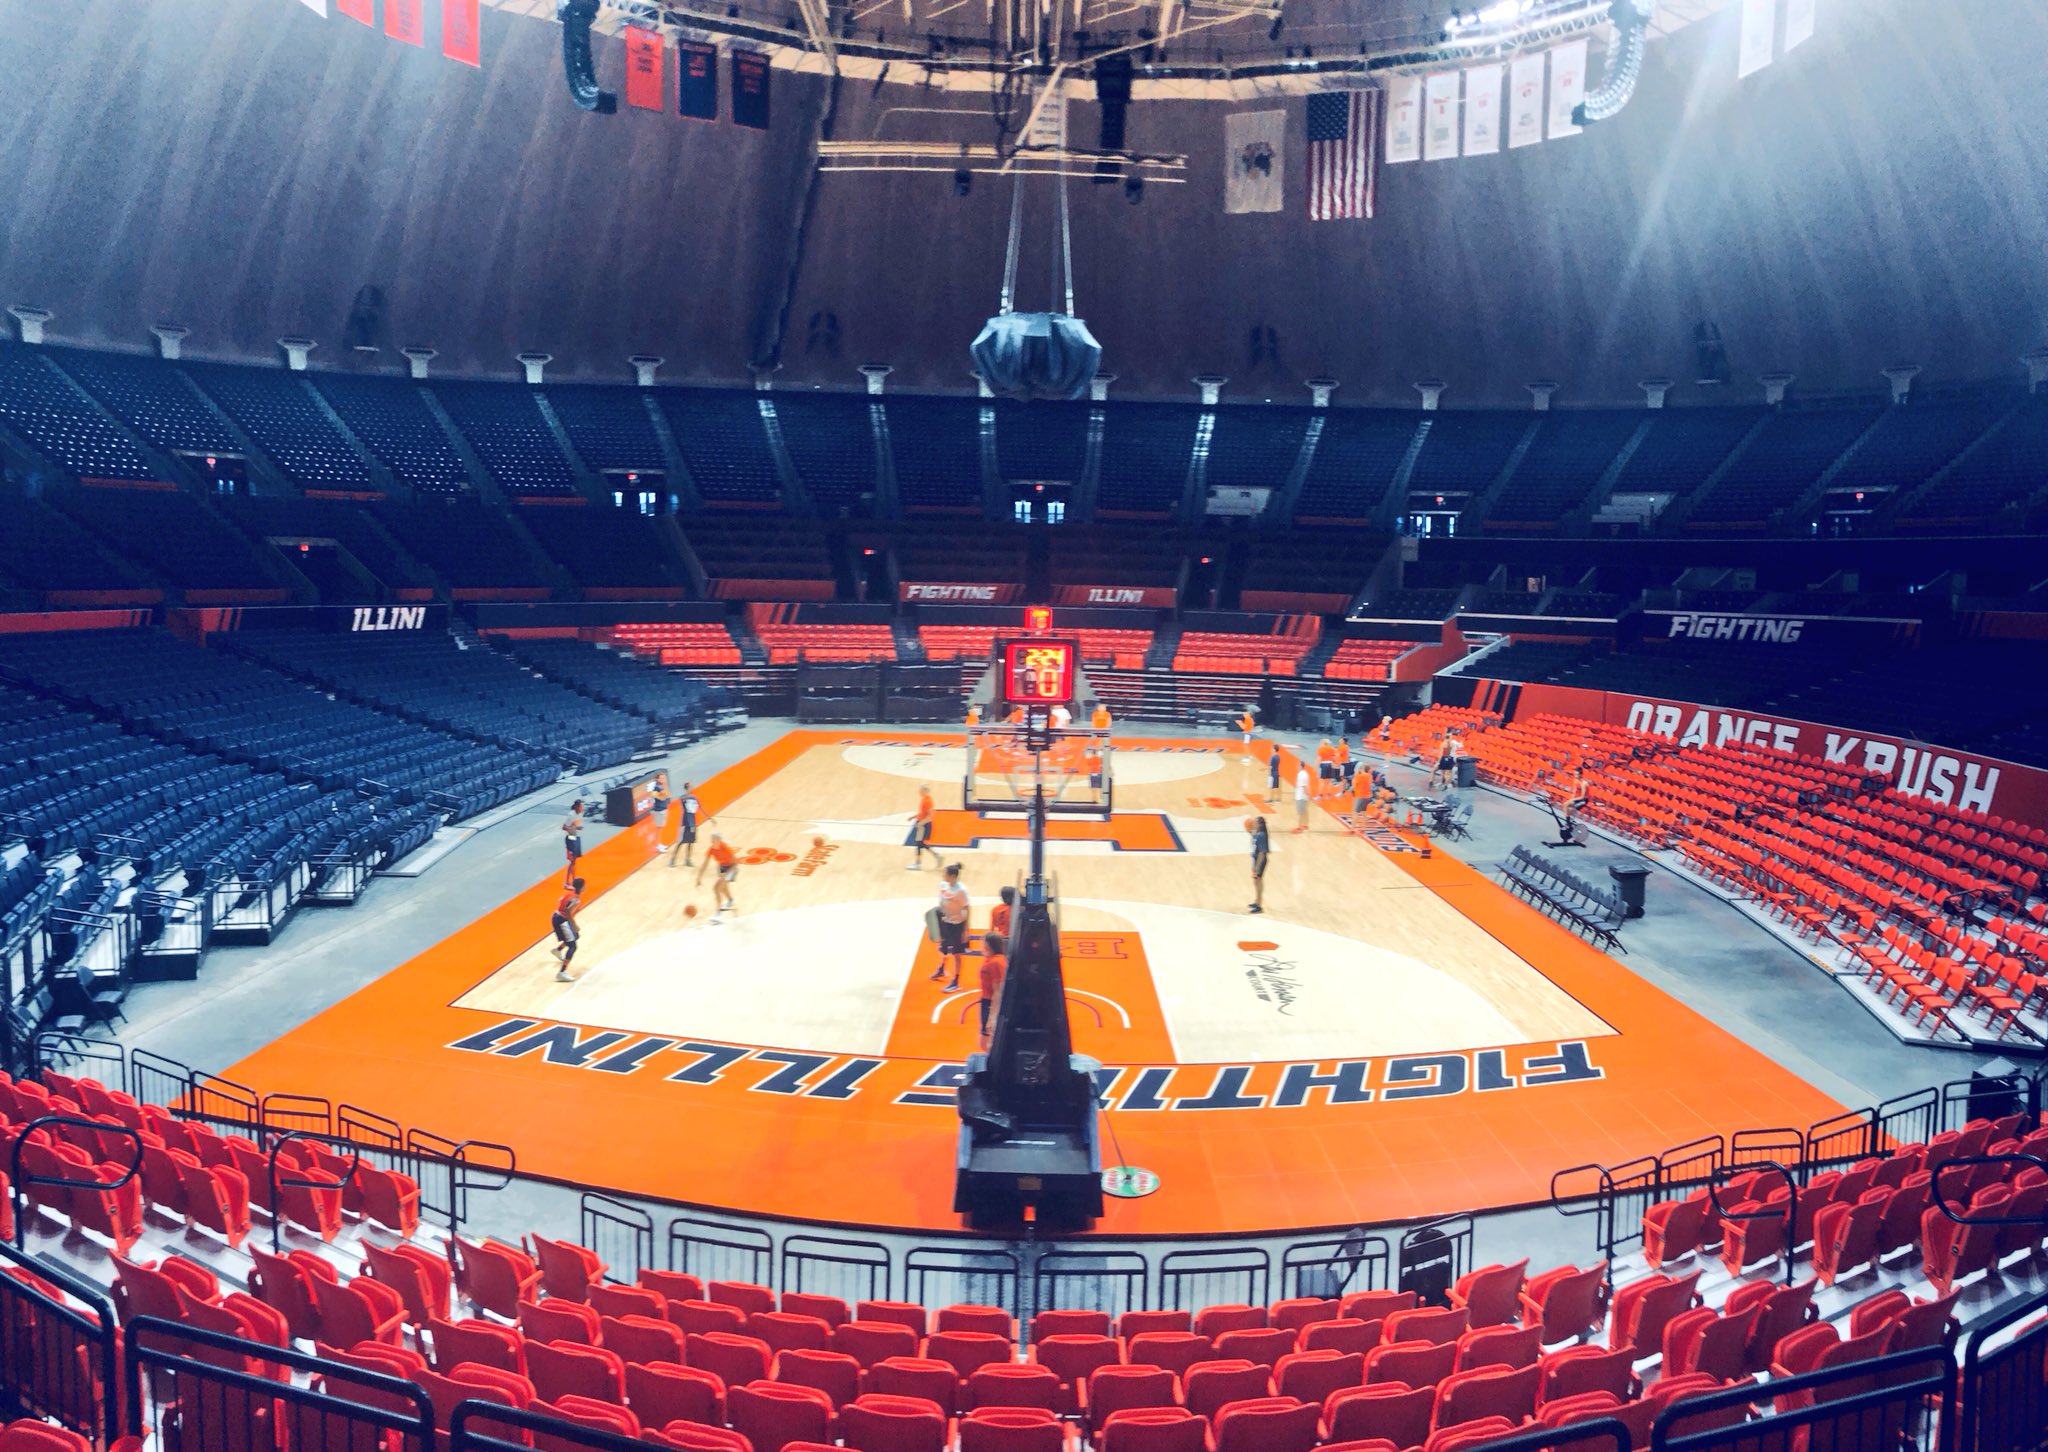 Illini W Basketball on Twitter "Starting the week off in